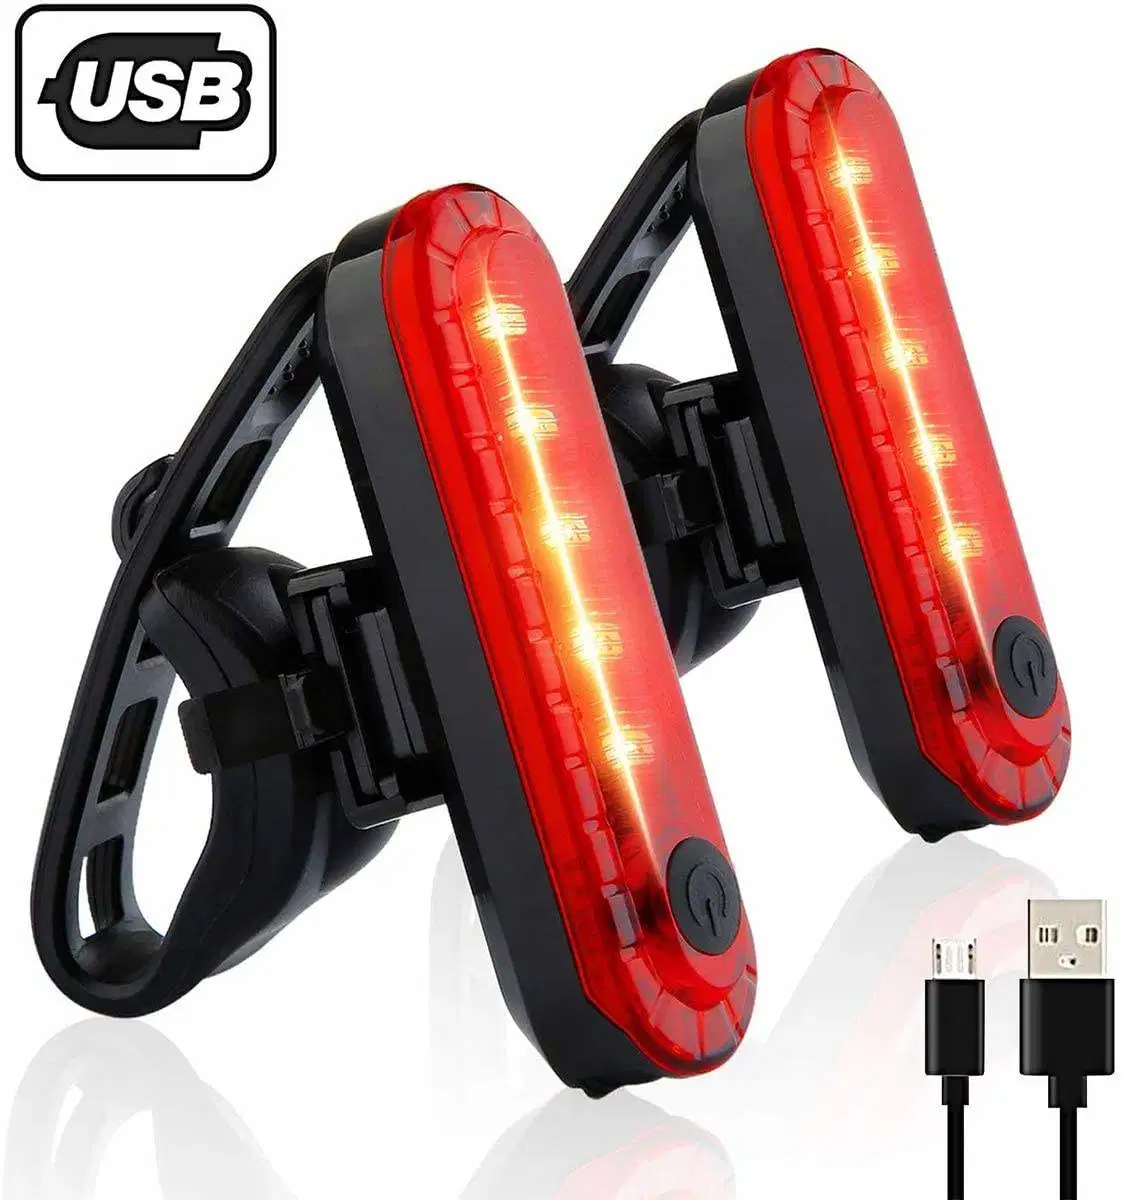 LED Accessories Fits on Any Bike or Helmet Rear Bike Tail Light